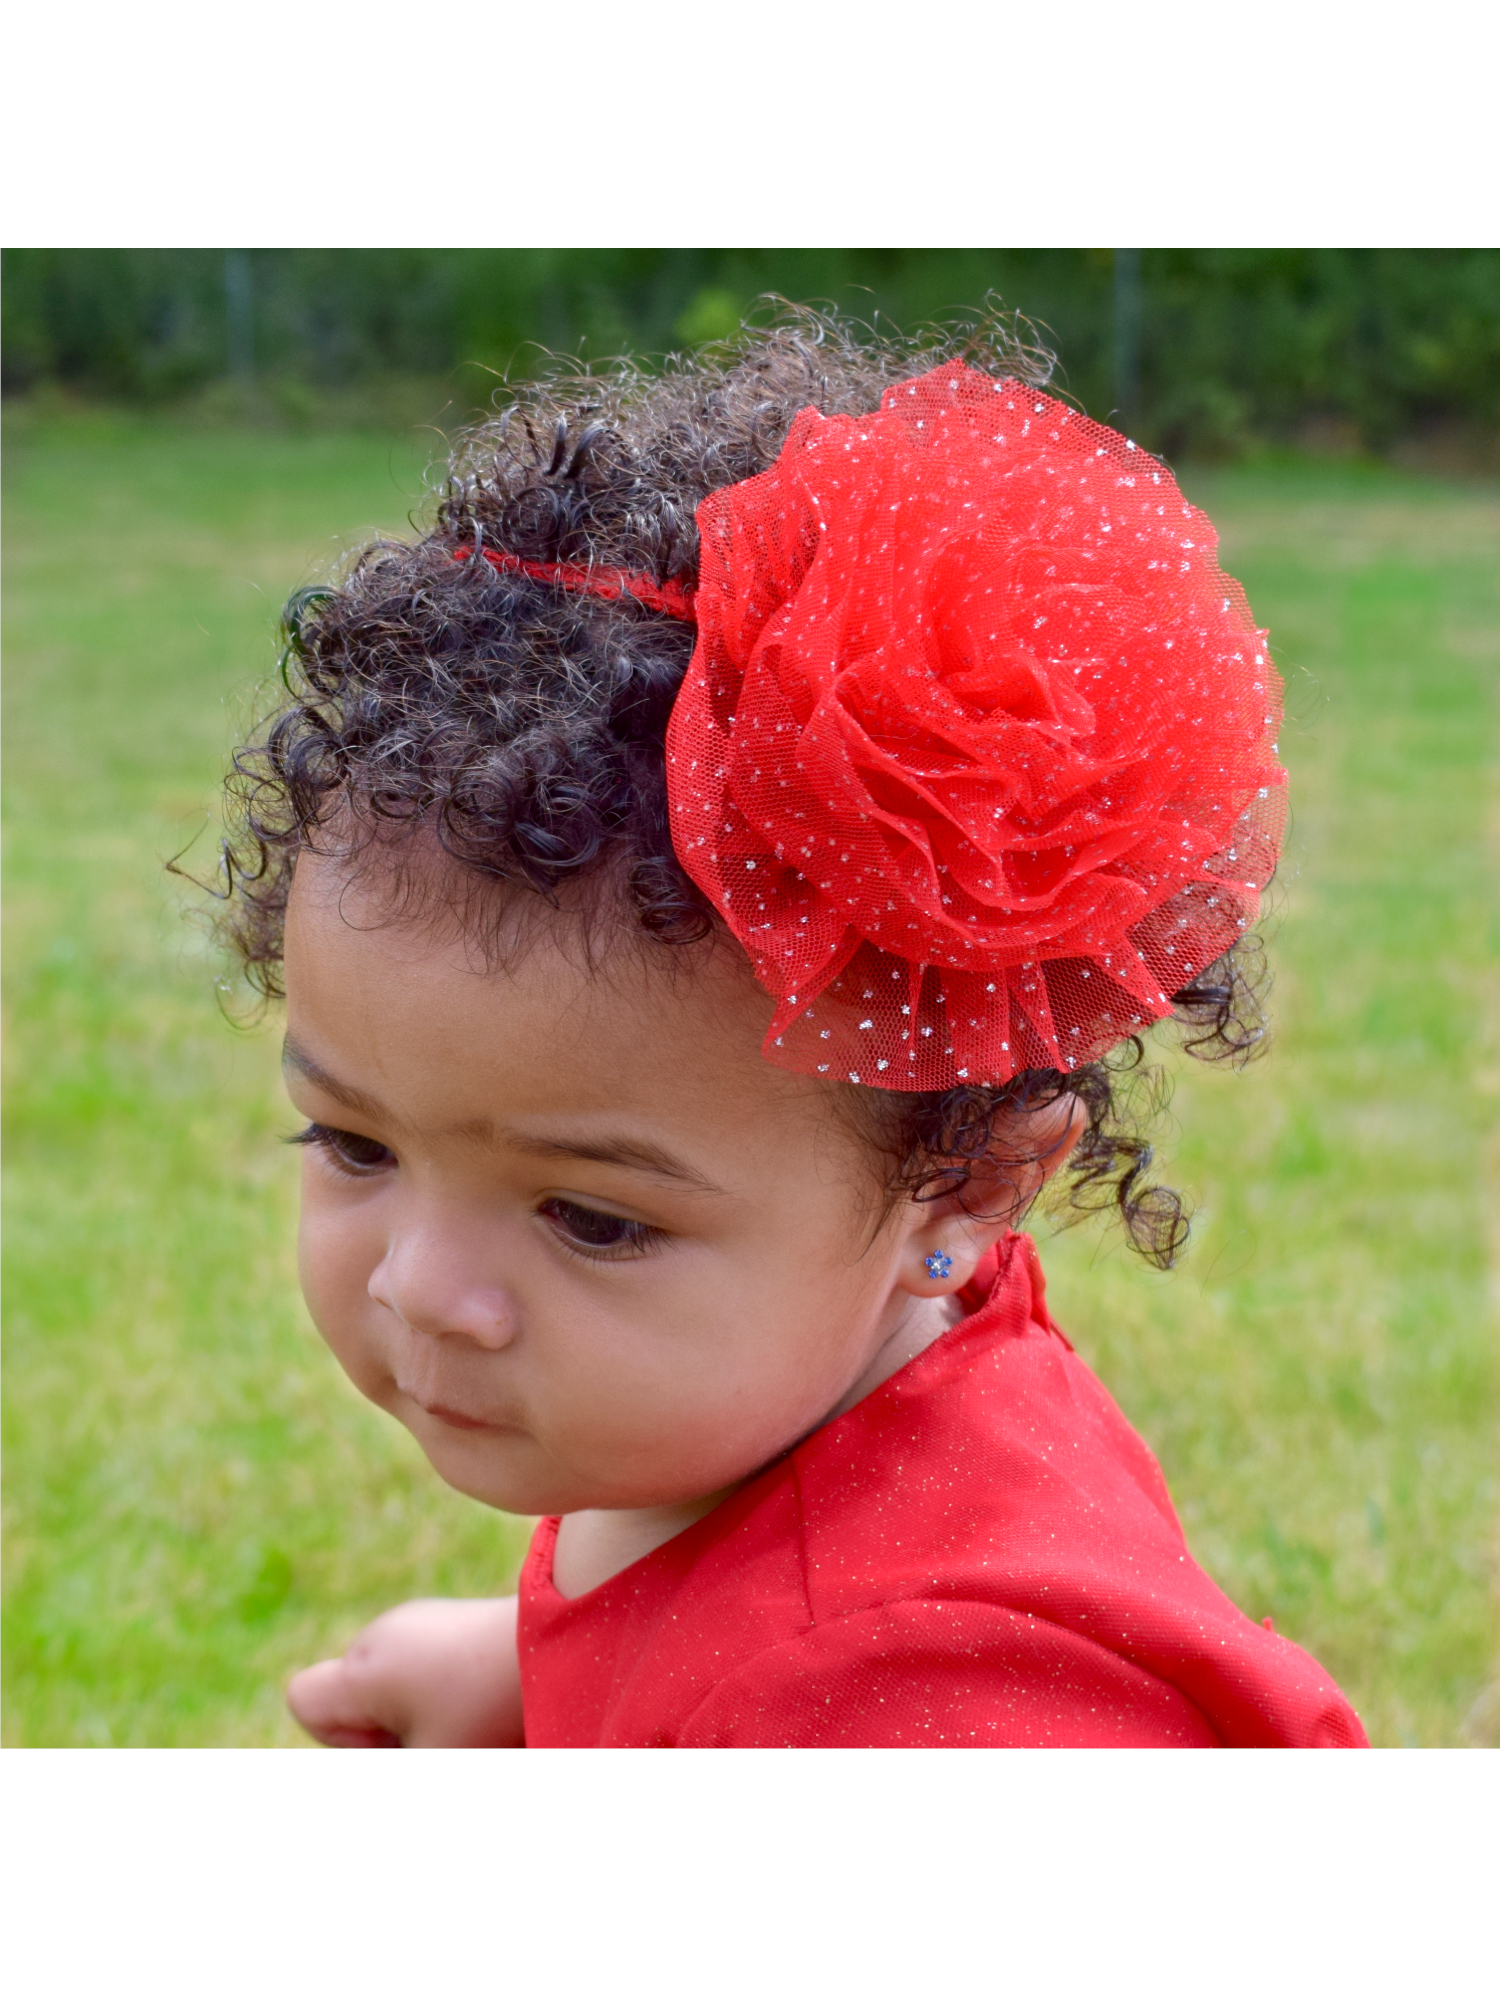 Khristie® Baby & Toddler Autumn 18PC Hair Accessory Assortment - image 4 of 7